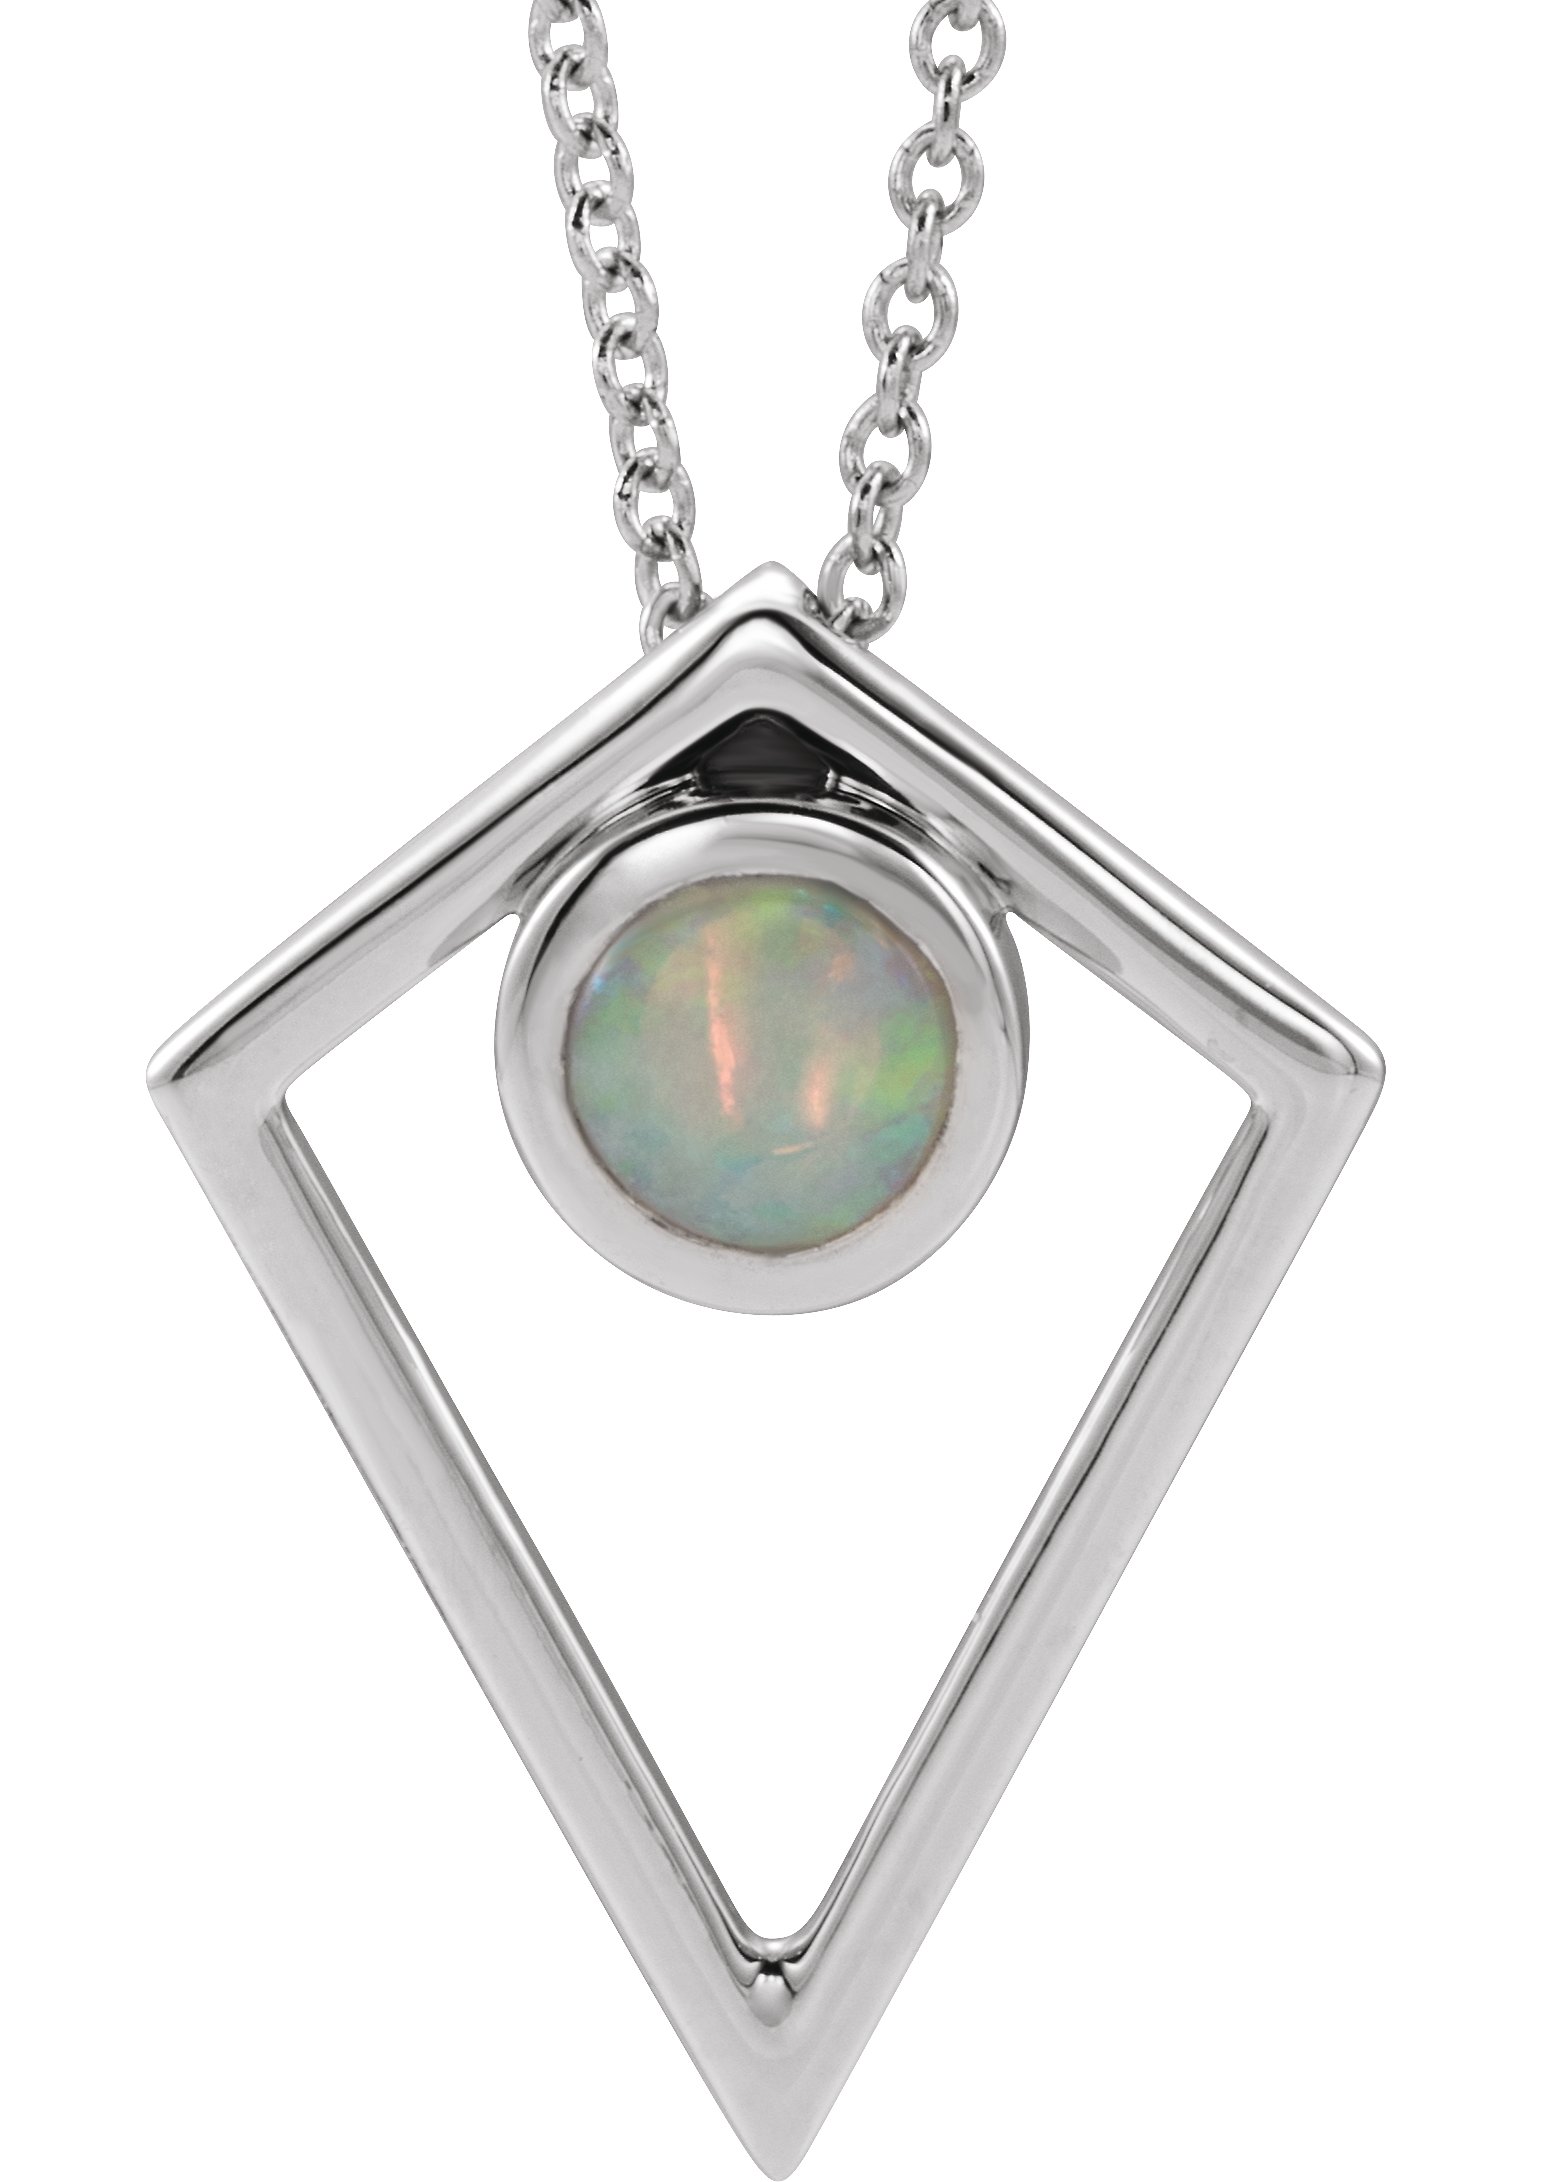 Sterling Silver Natural Opal Cabochon Pyramid 24" Necklace